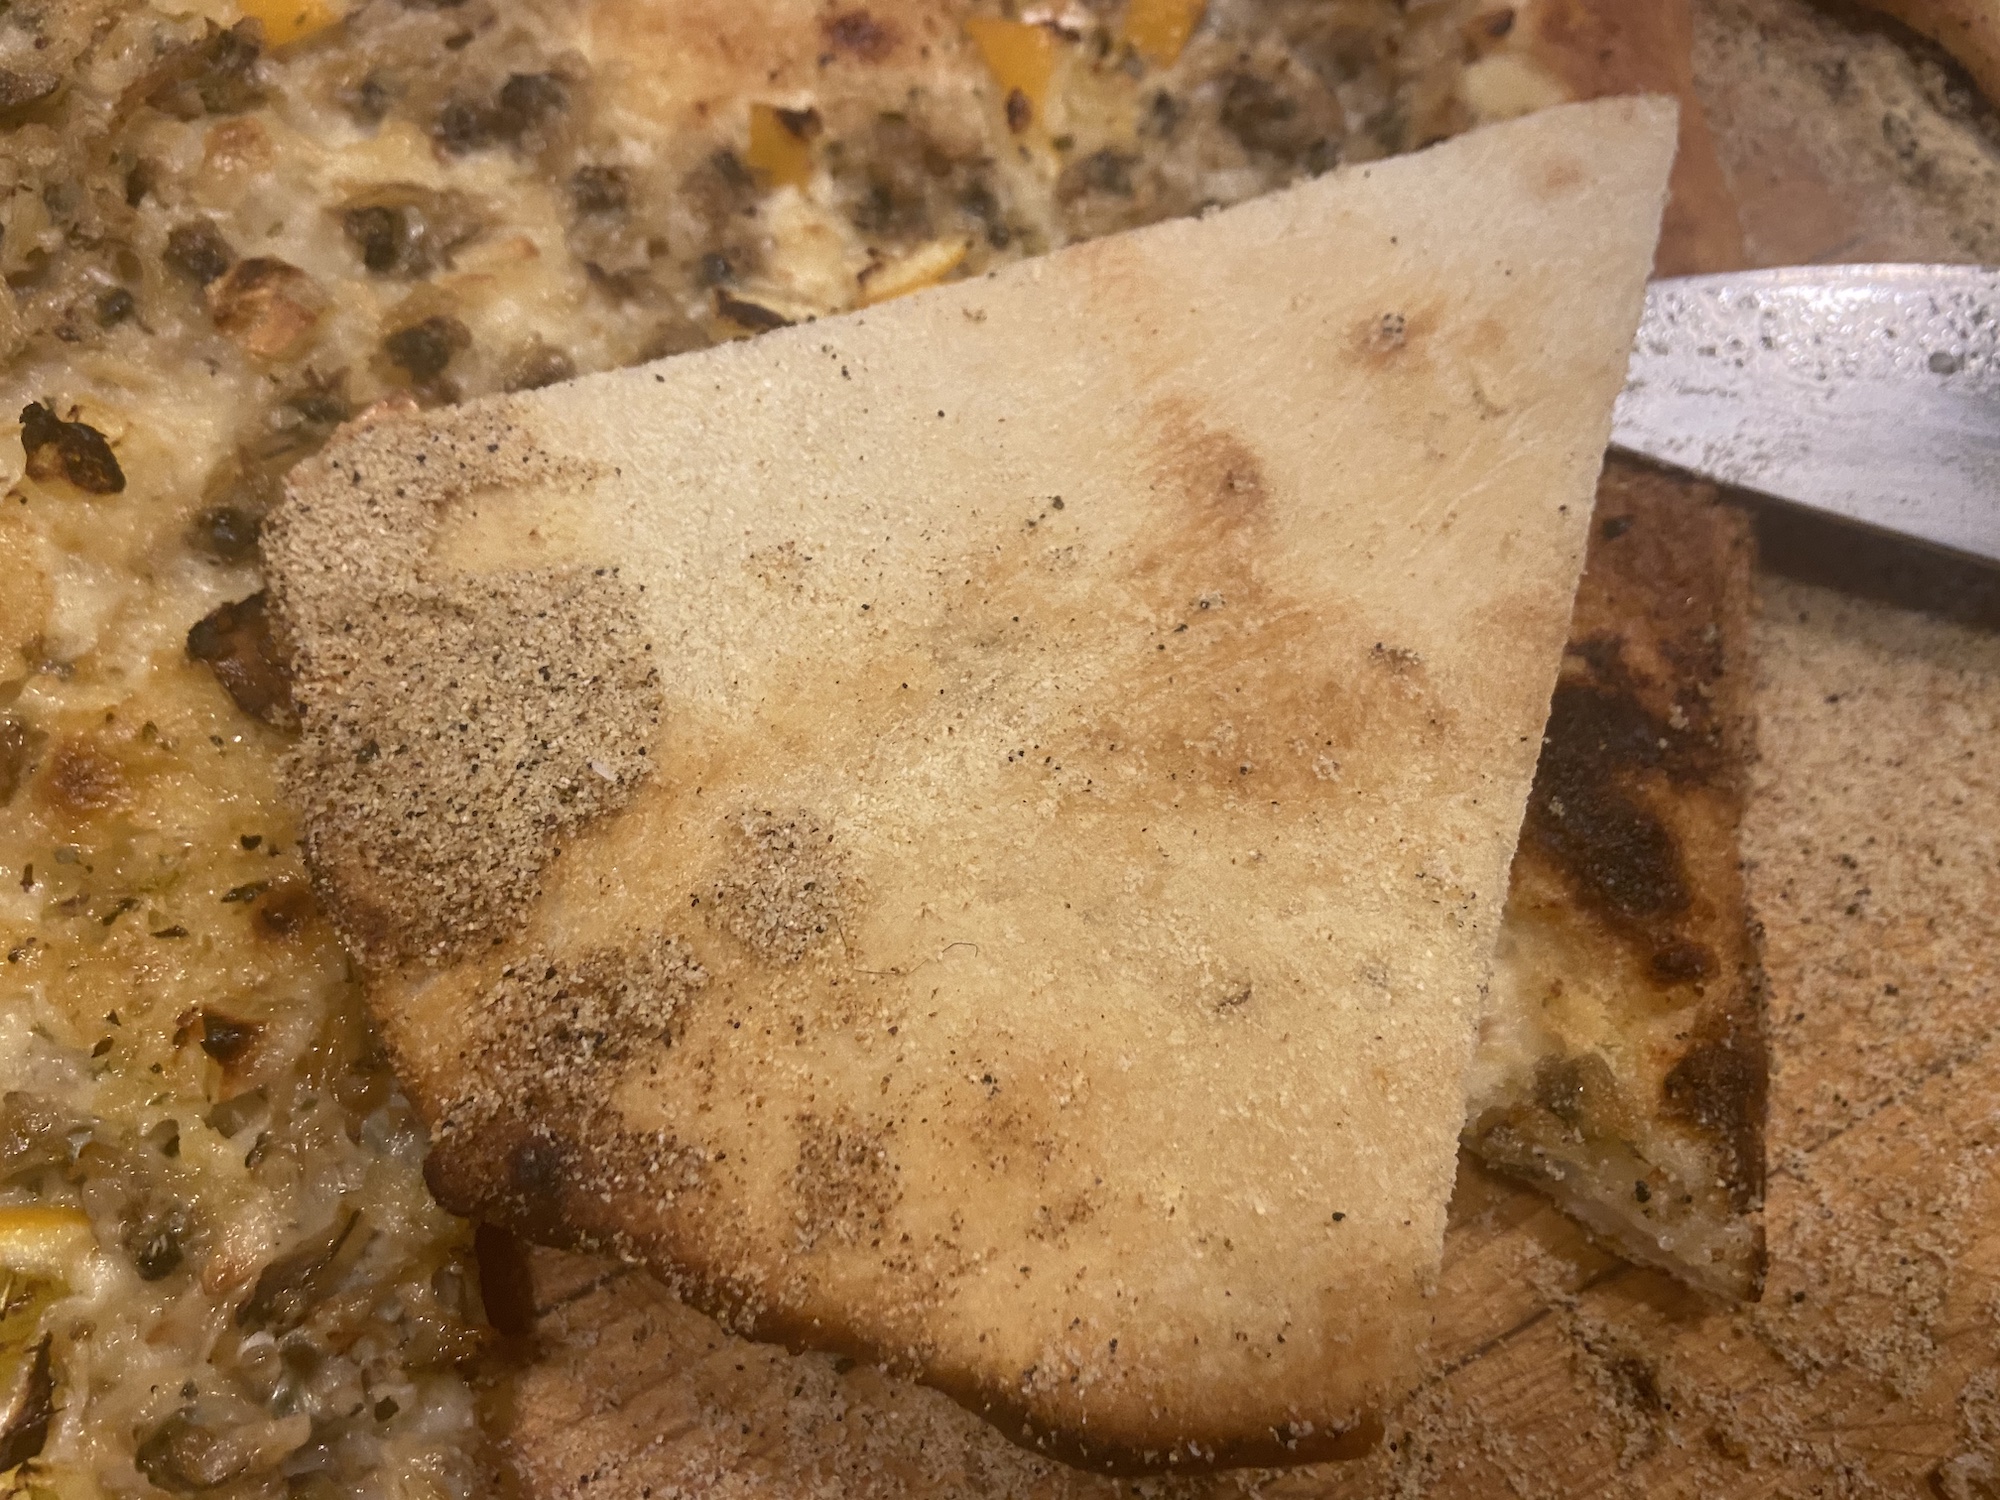 bottom of my clam pizza with some residual semolina that can be brushed off.